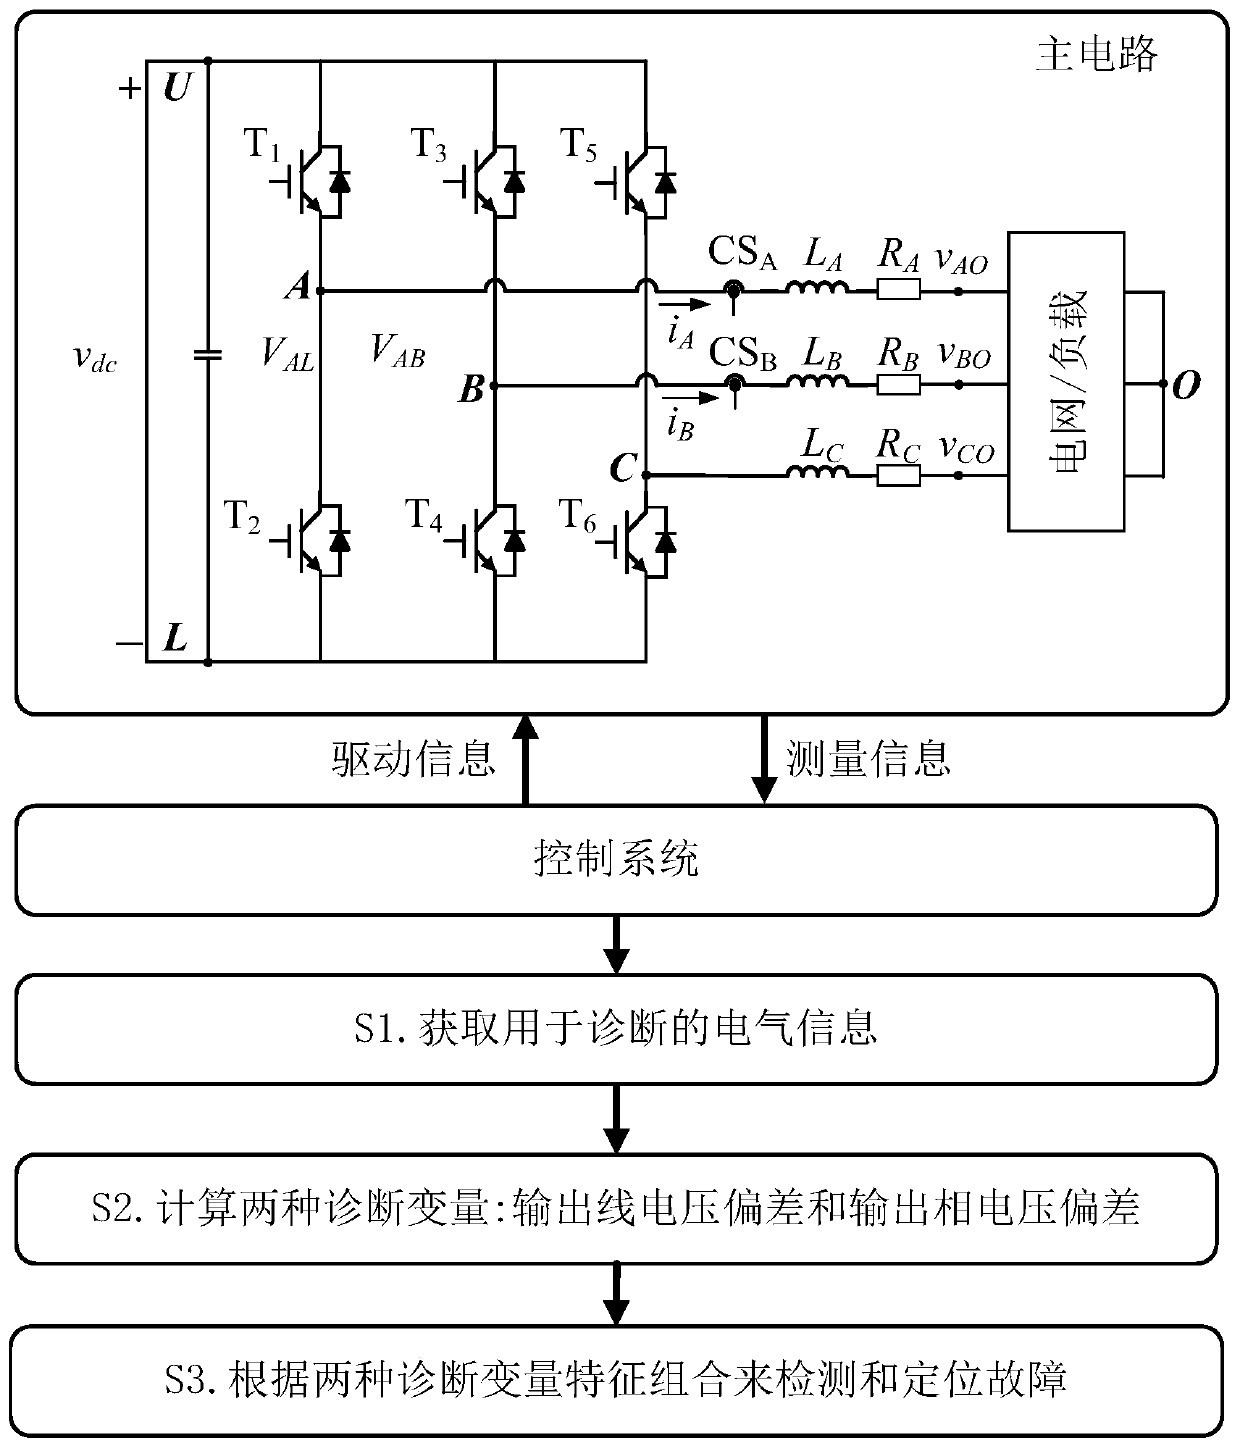 Comprehensive diagnosis method for open circuit fault of power tube of three-phase three-wire inverter with two current sensors and current sensor fault